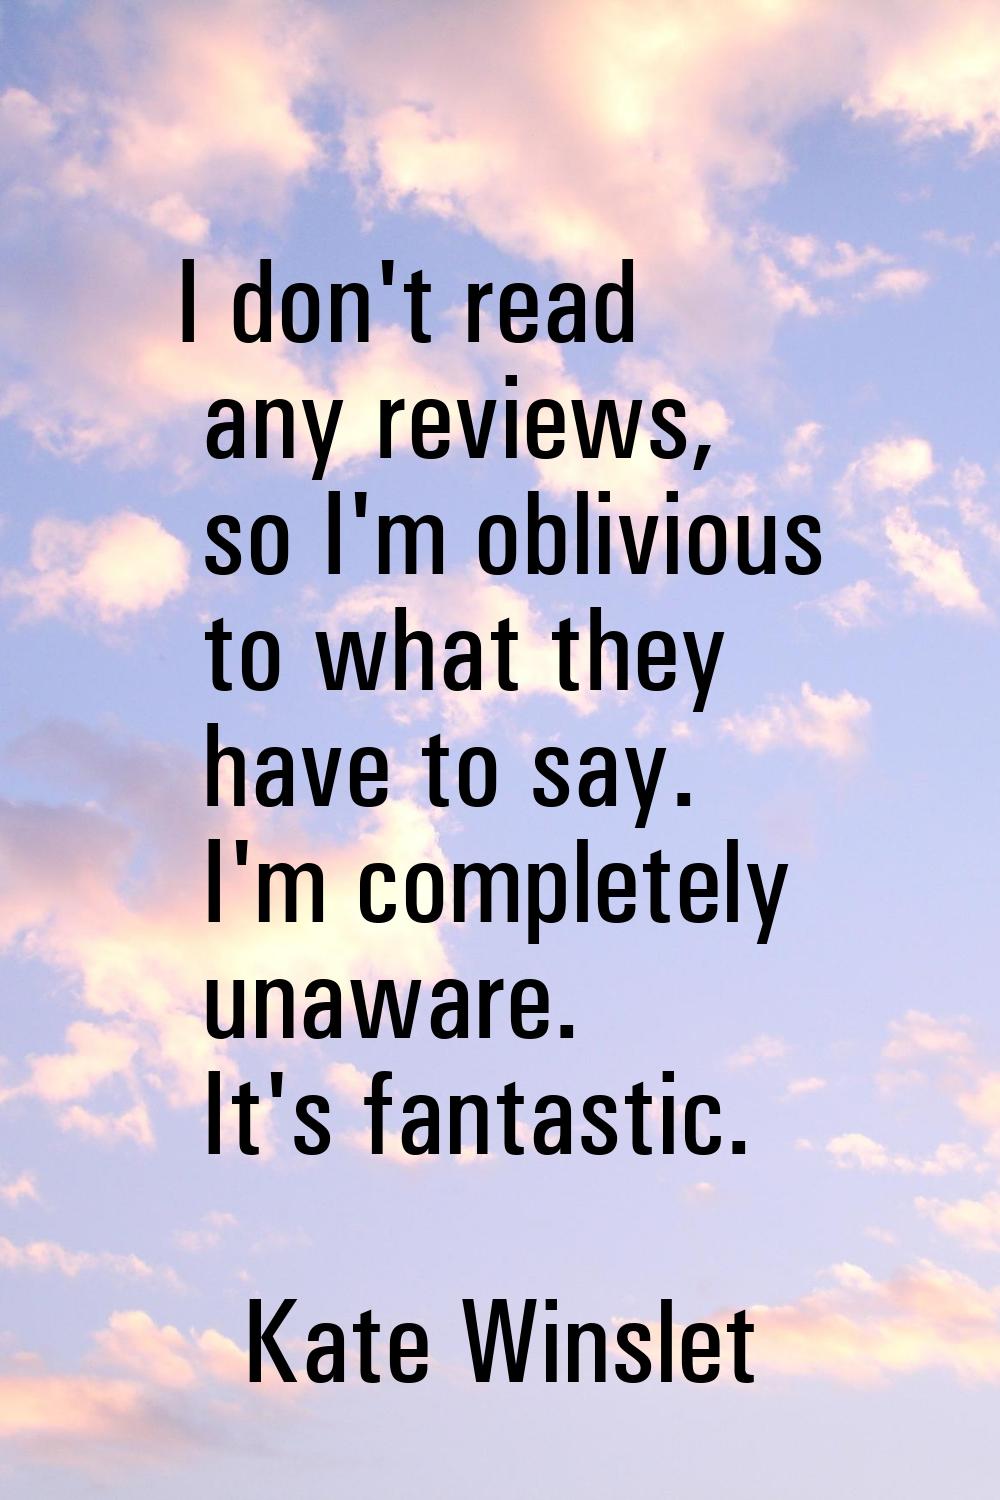 I don't read any reviews, so I'm oblivious to what they have to say. I'm completely unaware. It's f